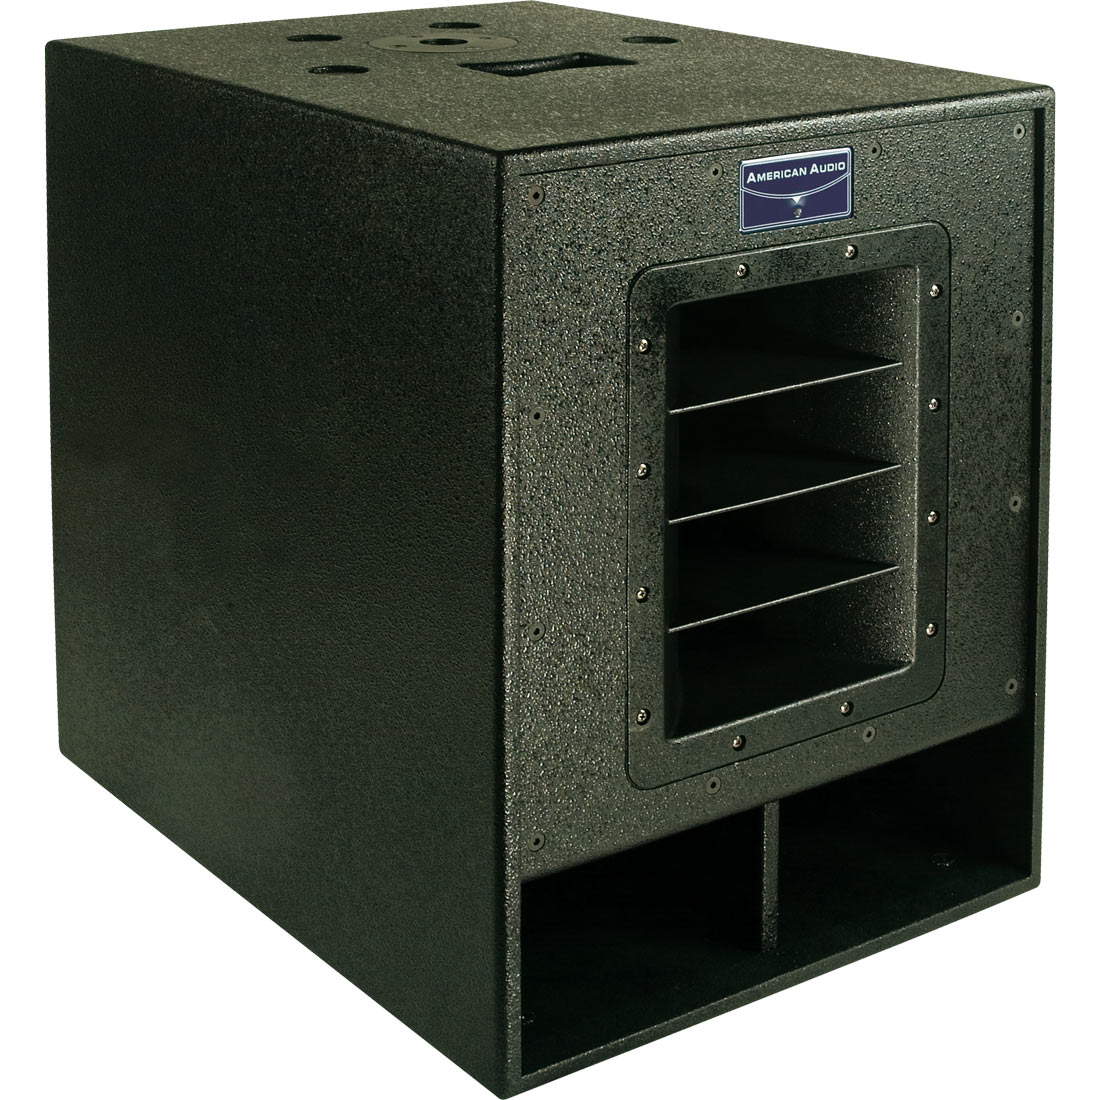 PXW 15P powered subwoofer